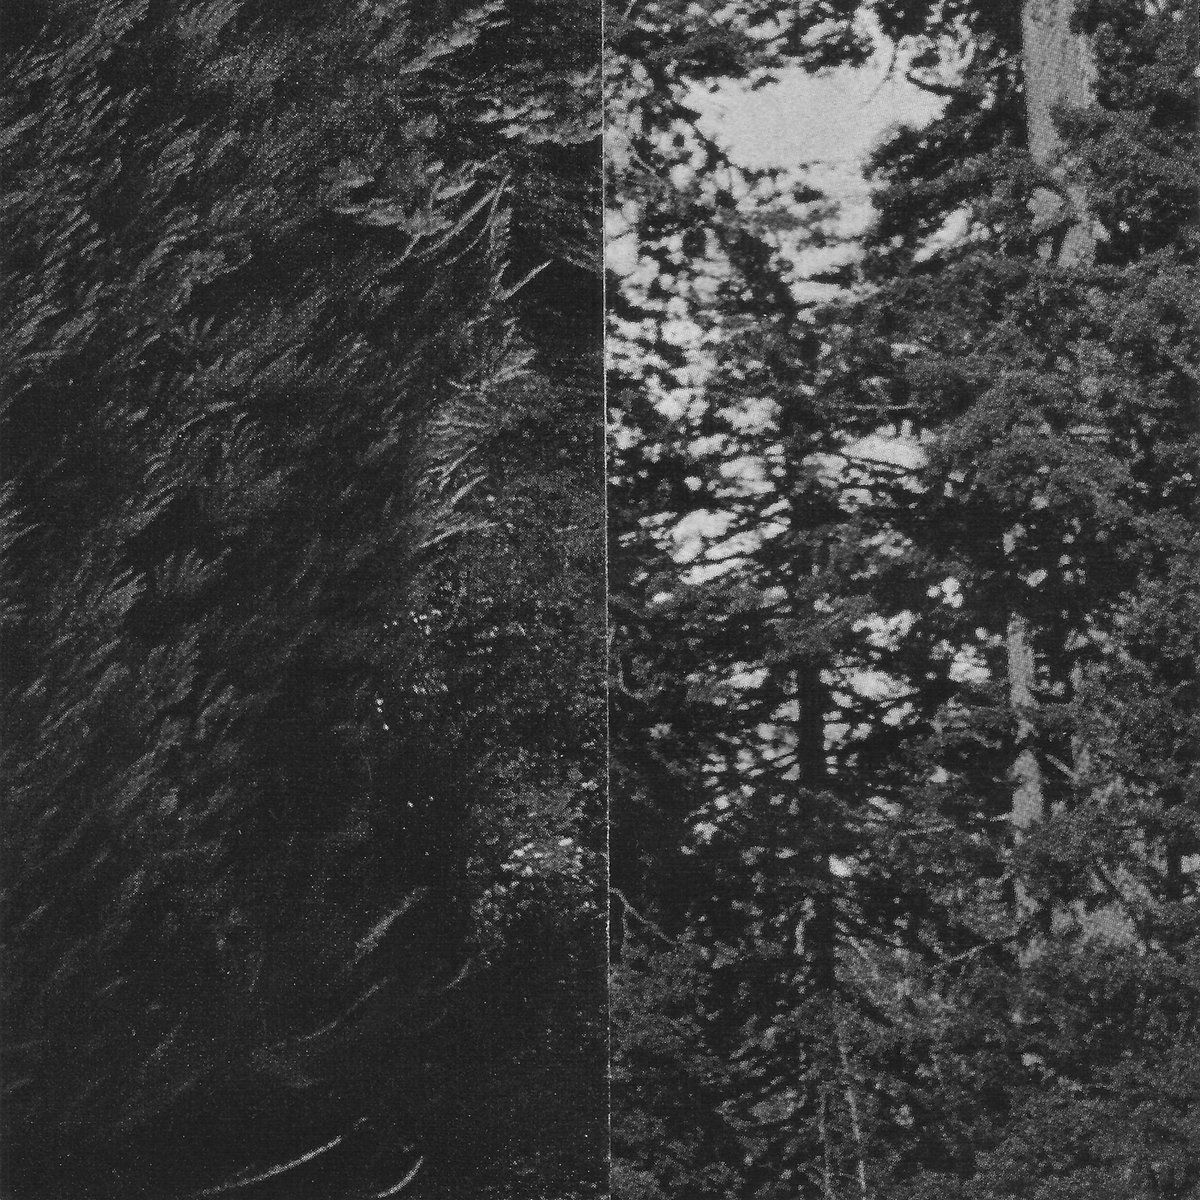 Album cover. Collage of two side by side photos depicting forestry textures